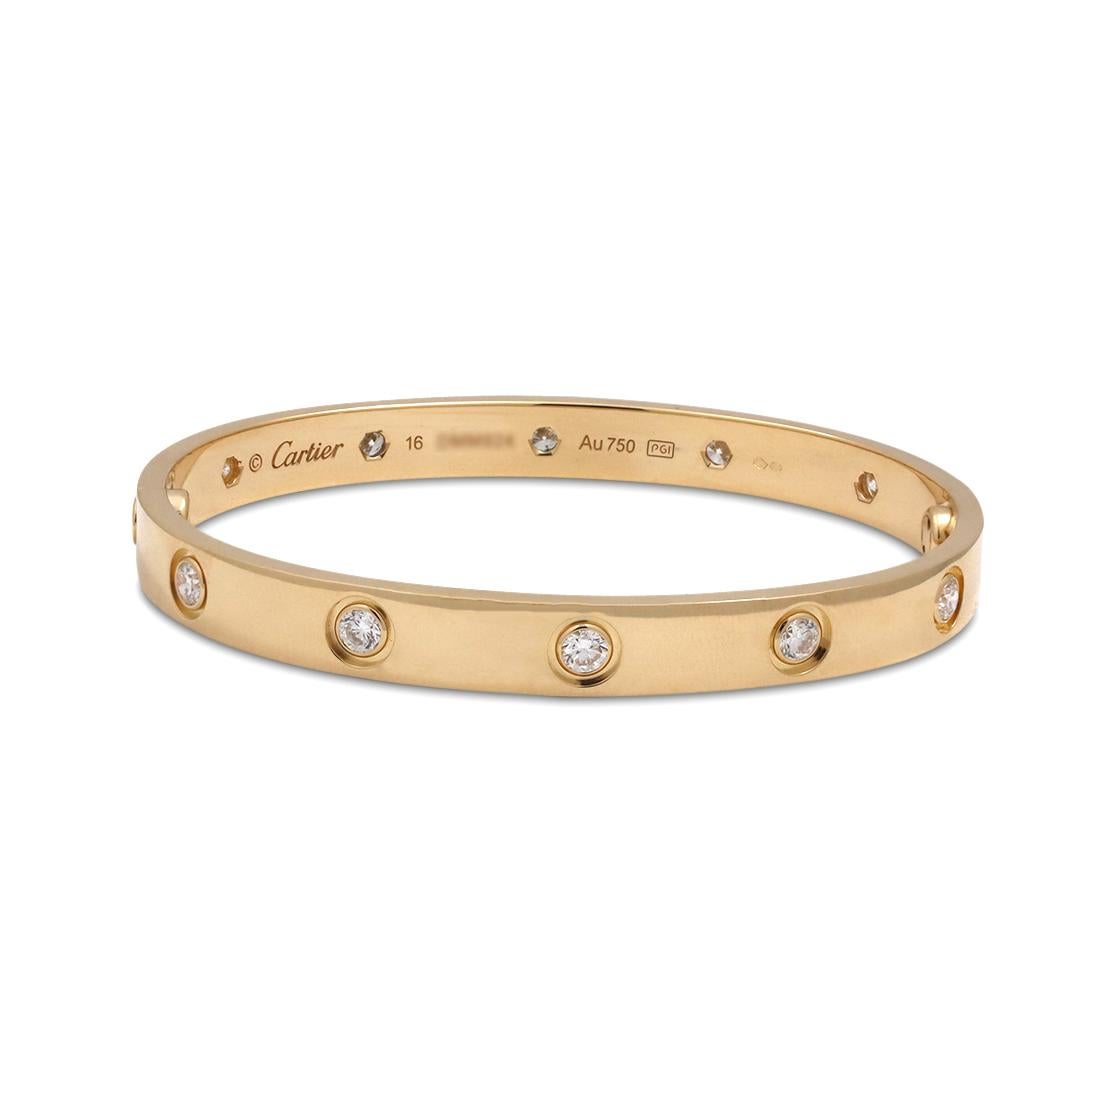 Authentic Cartier 'Love' bangle bracelet crafted in 18 karat yellow gold set with ten round brilliant cut diamonds (E-F in color, VS clarity) weighing an estimated 0.96 carats total. Signed Cartier, size 16, Au750, with serial number and hallmarks.